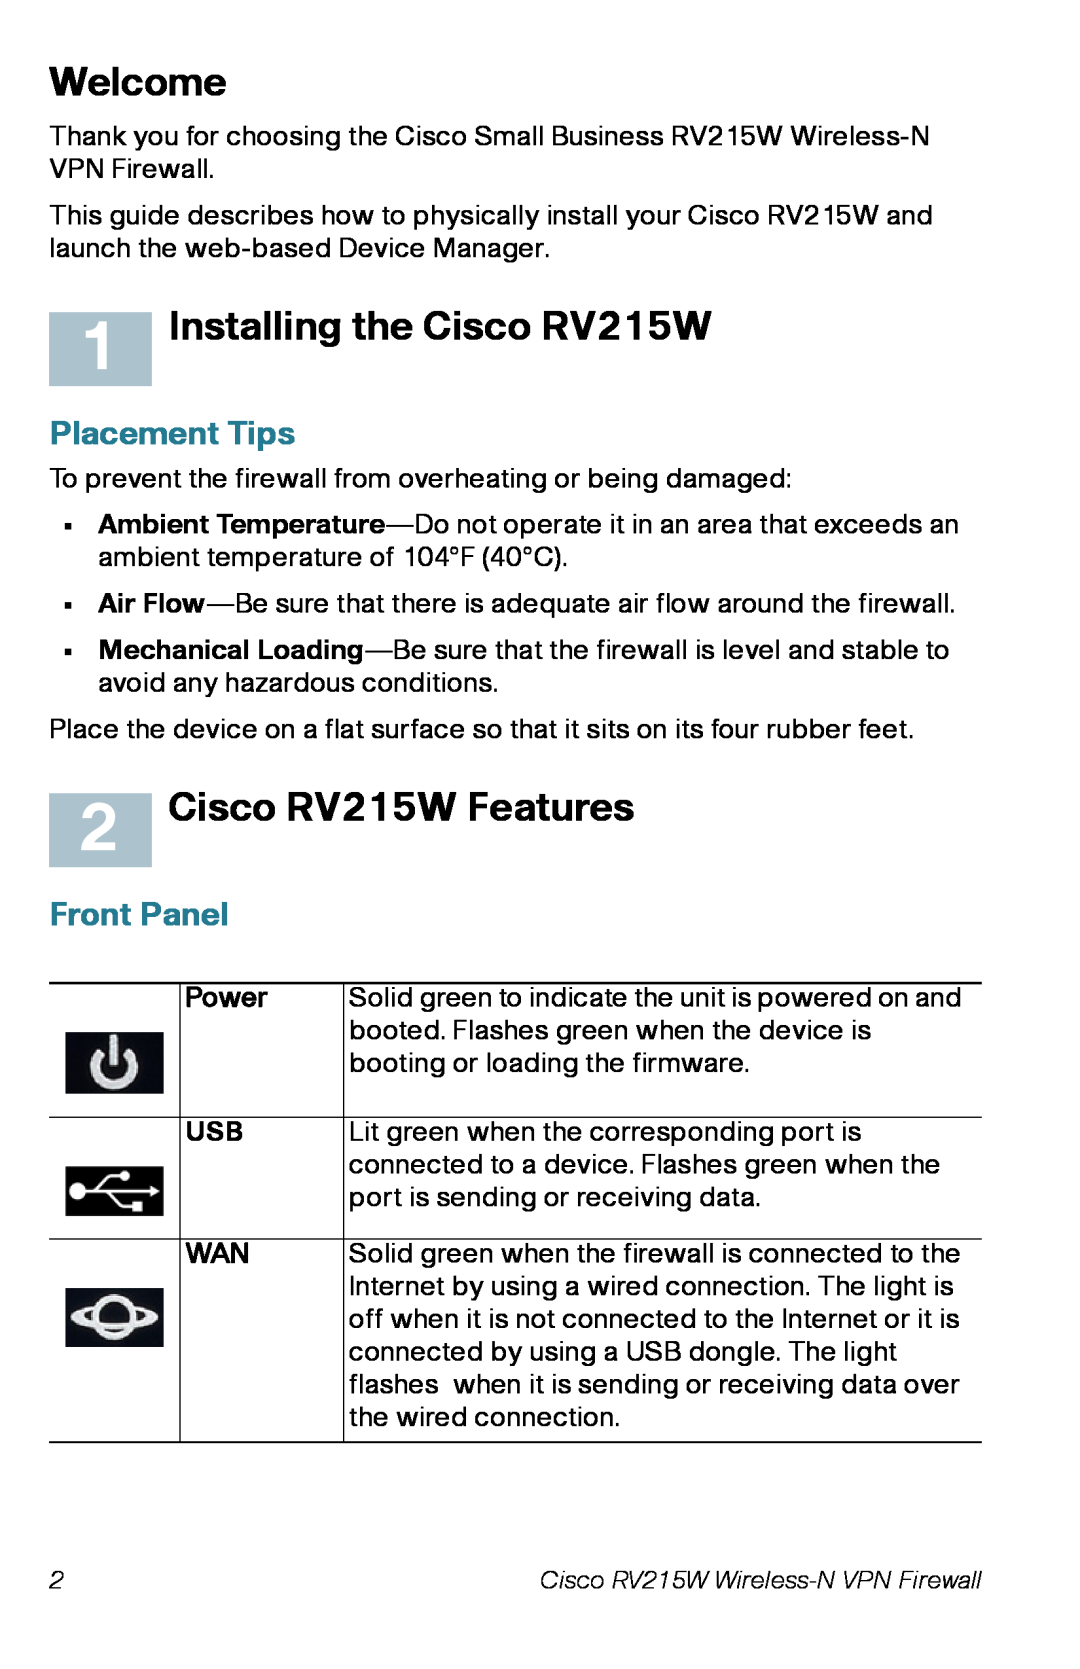 Cisco Systems RV215WAK9NA Welcome, Installing the Cisco RV215W, Cisco RV215W Features, Placement Tips, Front Panel, Power 